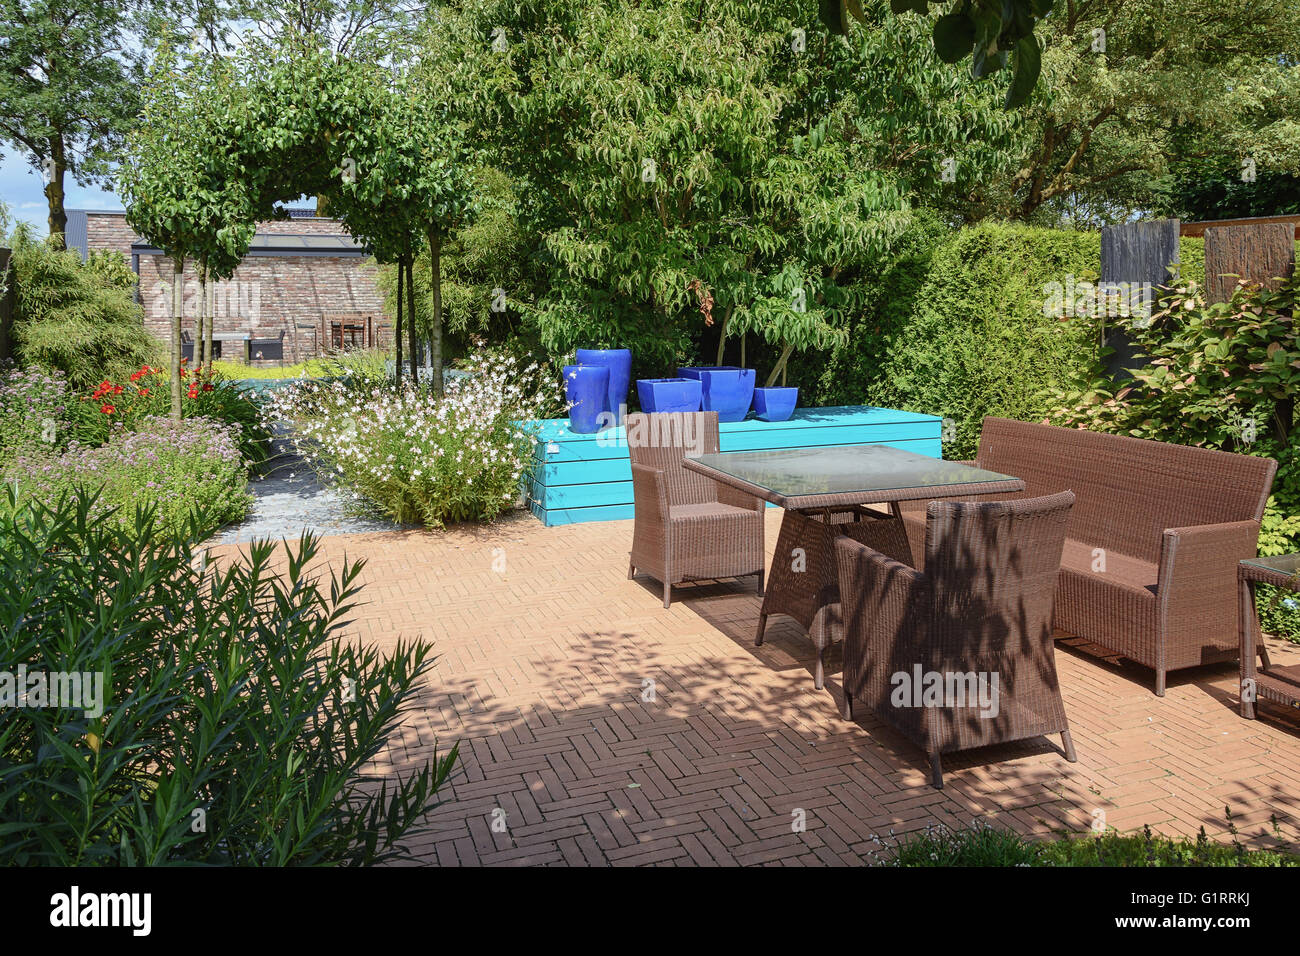 The recreation area with garden furniture. Stock Photo